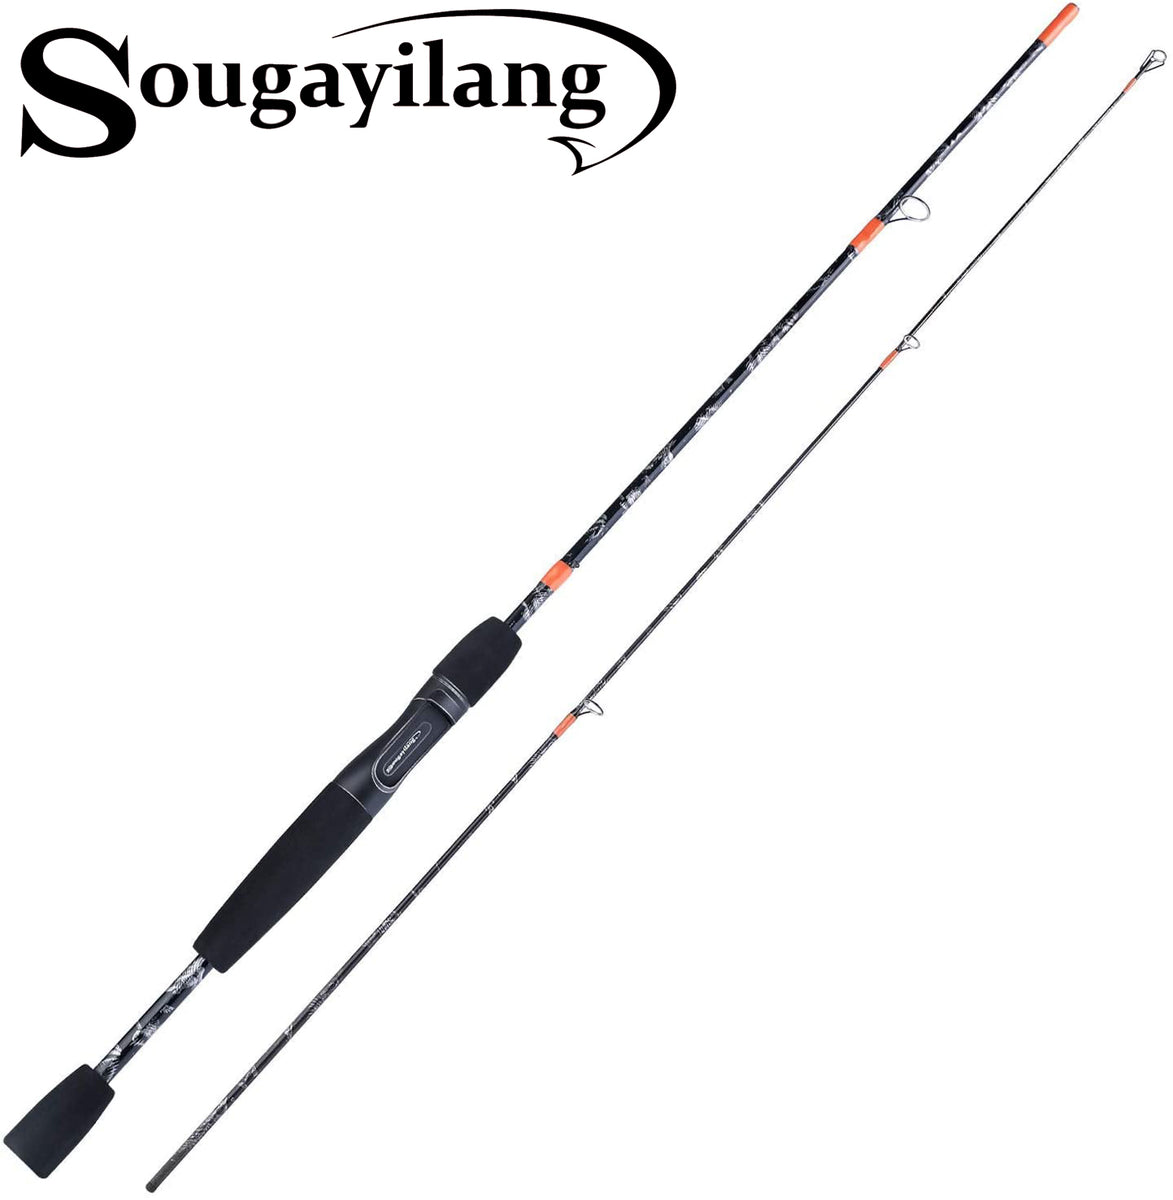 Sougayilang Fishing Rod, Spinning Rod and Casting Rod, 2-Piece Fishing Pole  Composite Graphite and Glass Blanks, Stainless Steel Line Guides-5FT